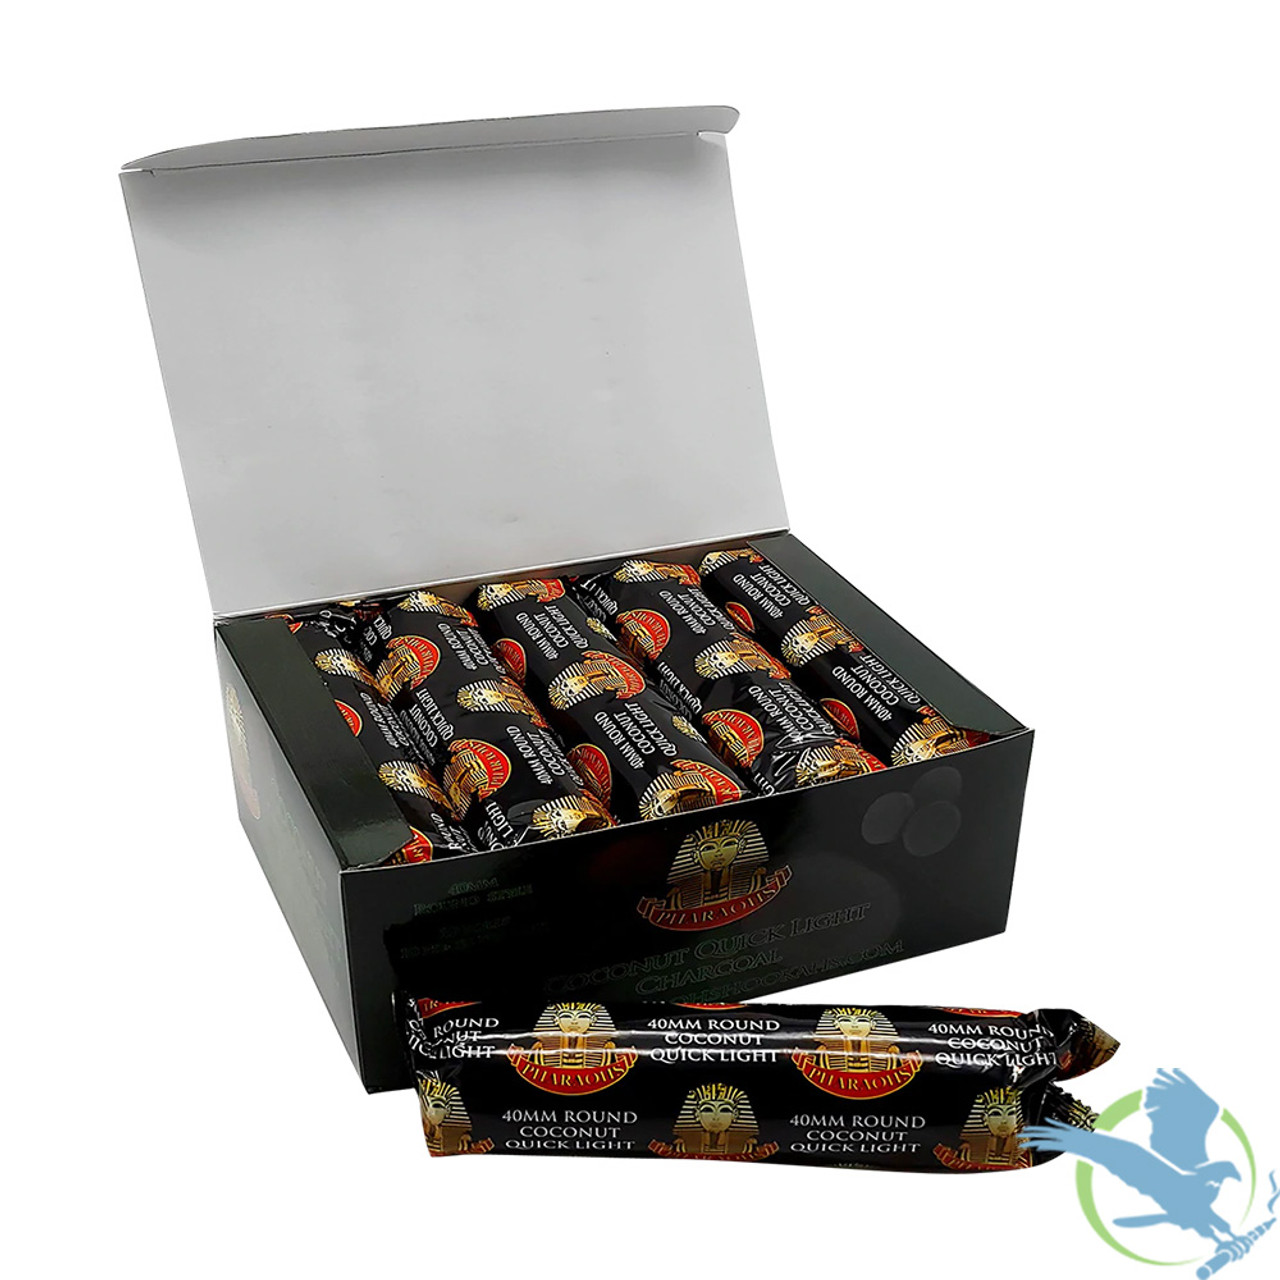 Pharaohs Coconut Quick Light Charcoal 40mm Round Style - 100 Pieces  [CH1902] (MSRP $15.00)